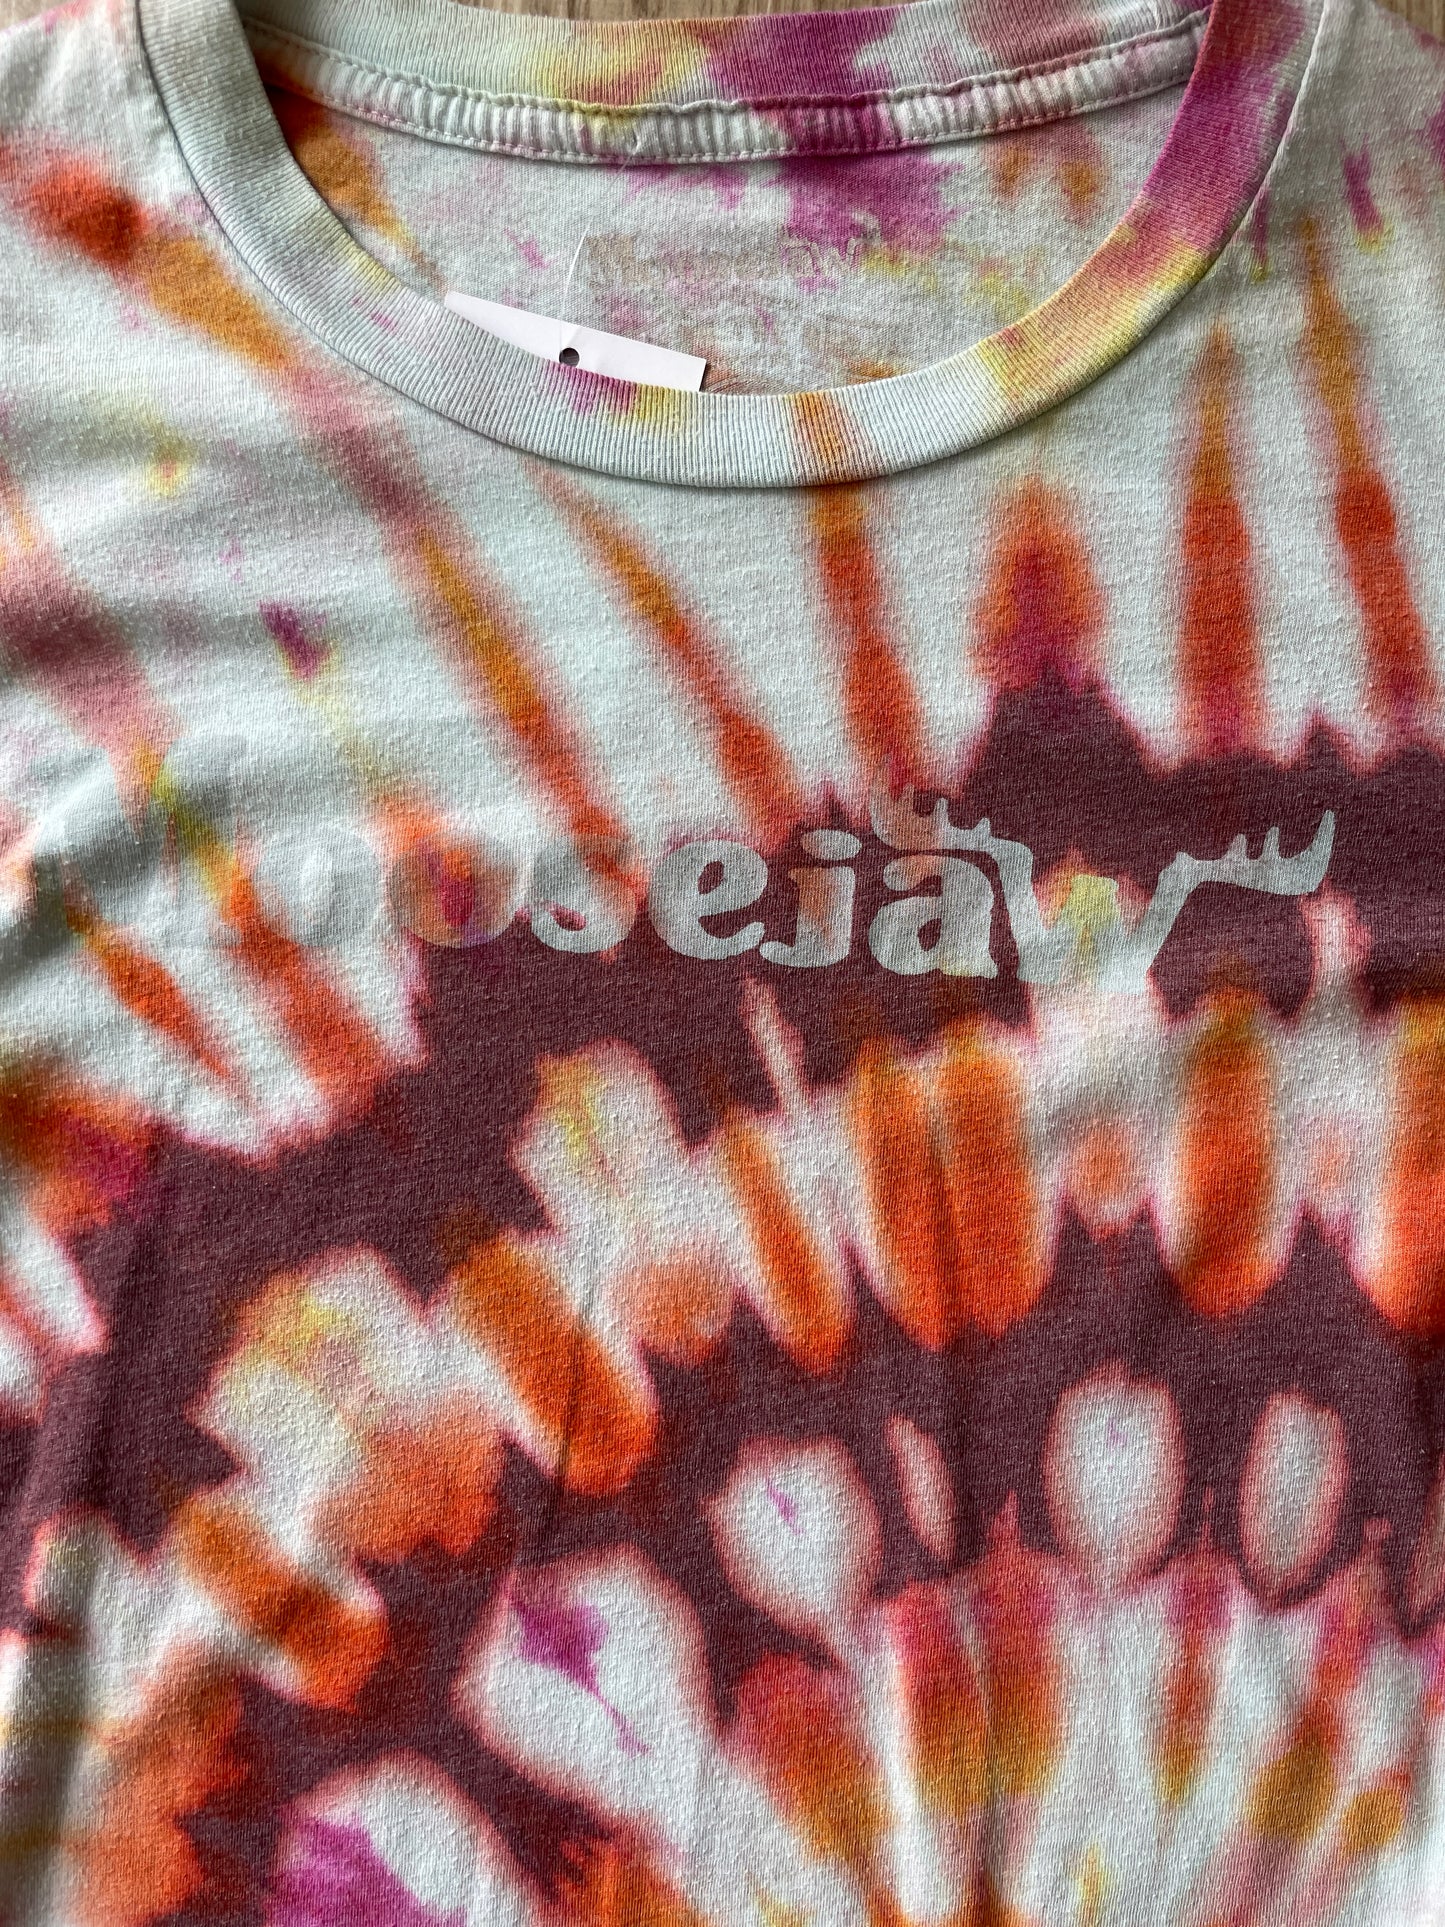 SMALL Women's Moosejaw Handmade Tie Dye T-Shirt | One-Of-a-Kind Pink and White Long Sleeve